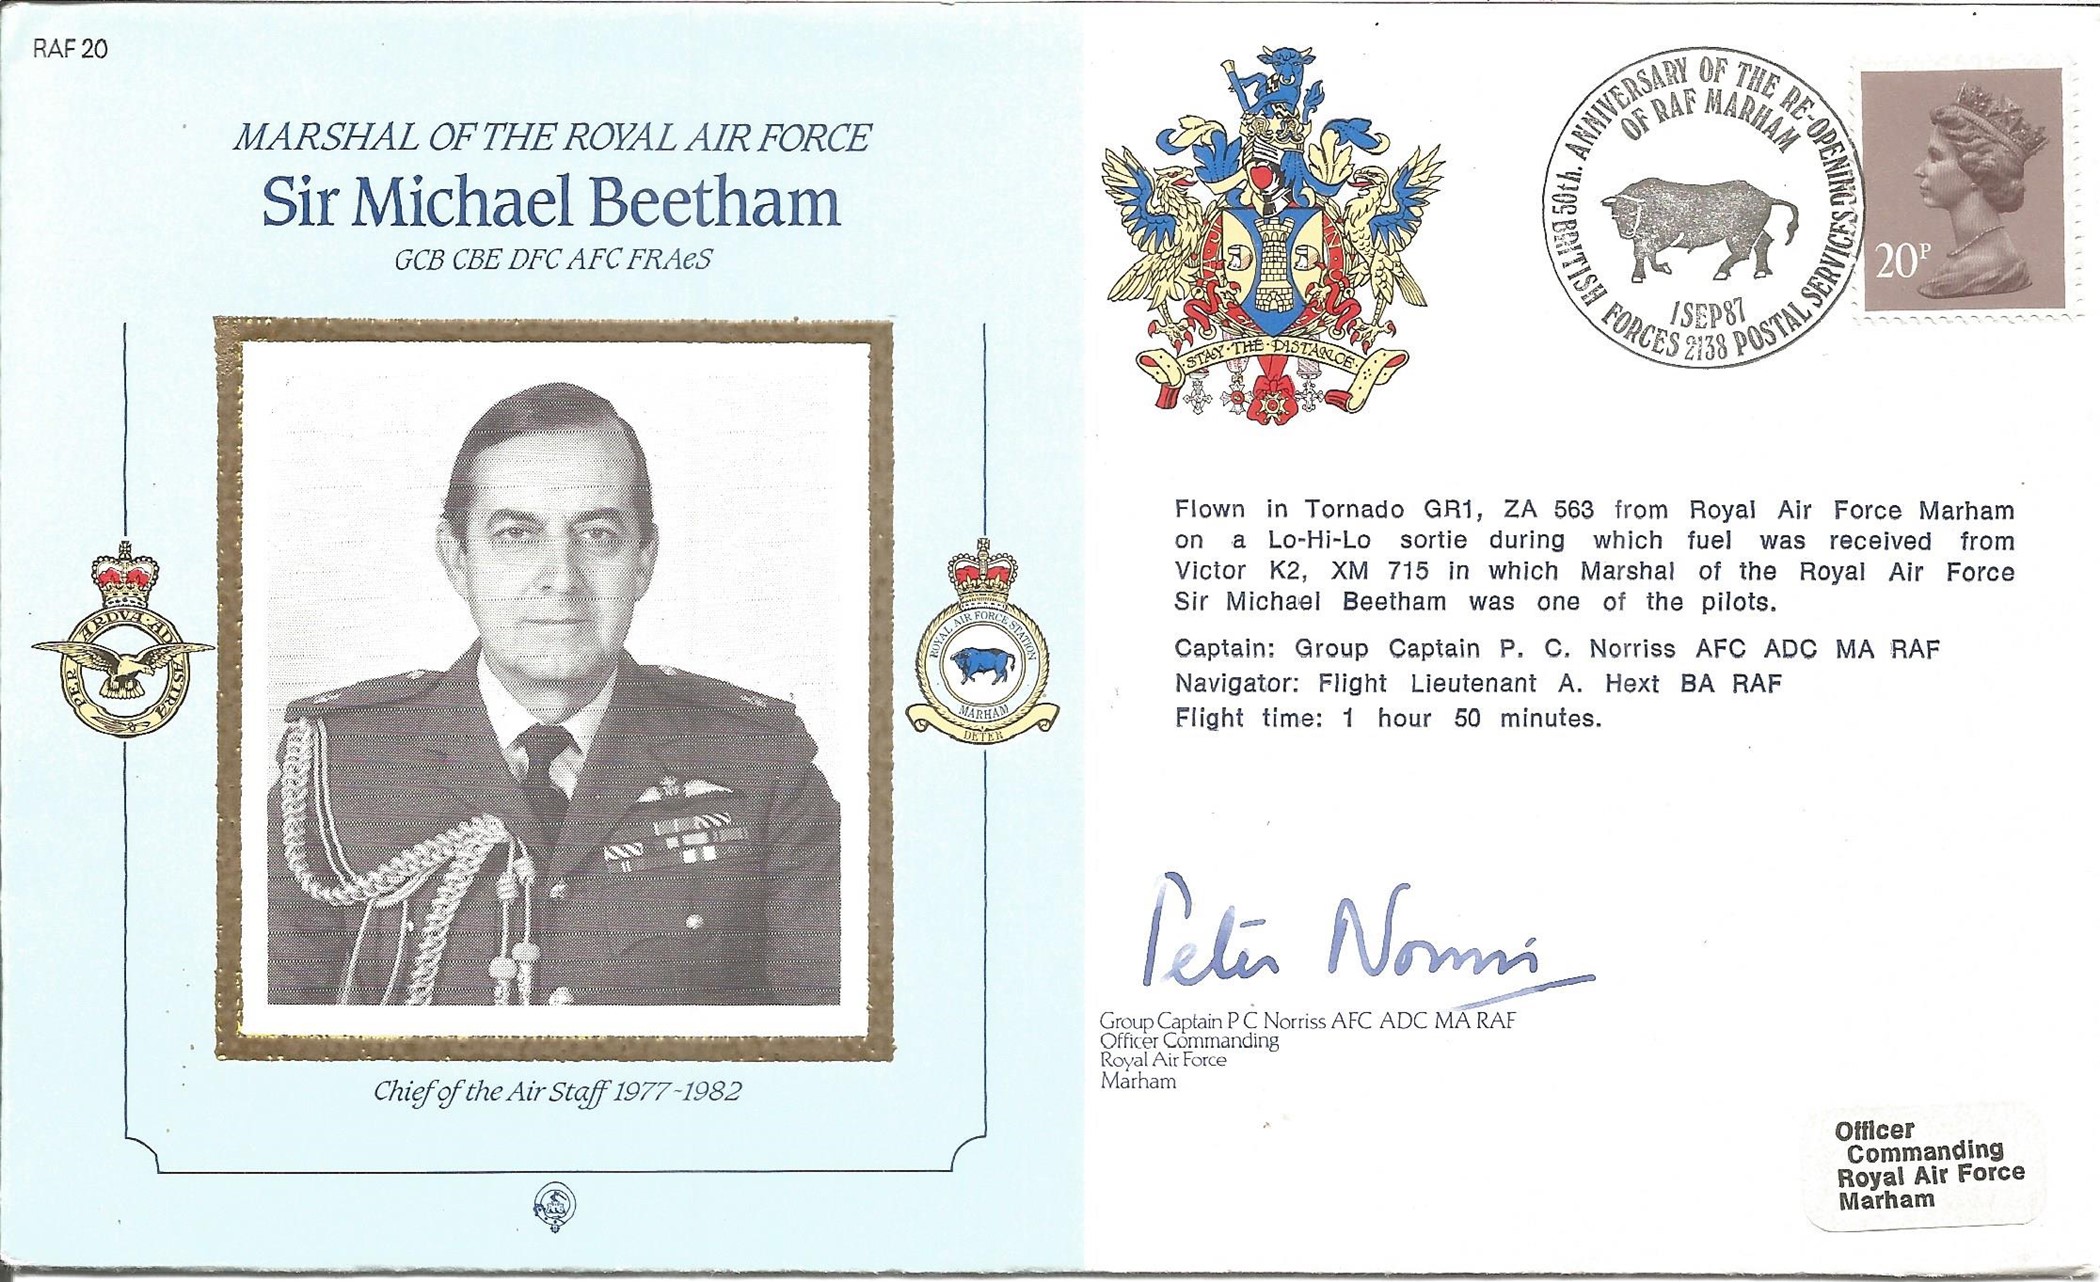 Sir Michael Beetham GCB CBE DFC AFC FRAeS Chief of Air Staff 1977 82 signed FDC No. 960 of 2000.